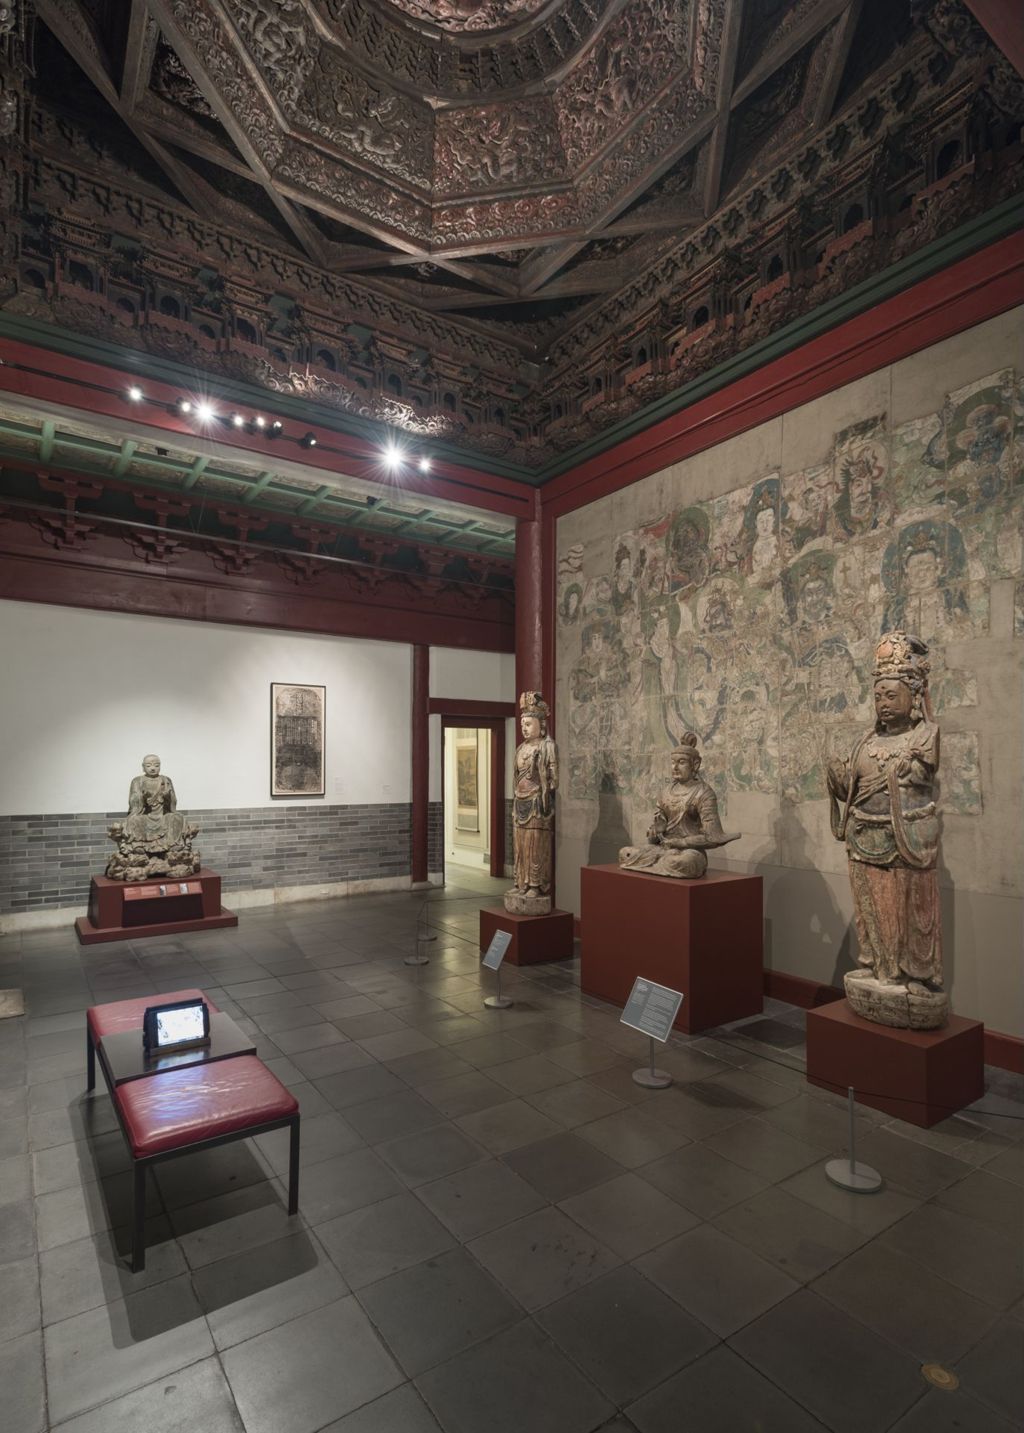 Miniature of Coffered Ceiling from Zhihua Hall (Zhihuadian, Hall of Transforming Wisdom), Philadelphia Museum of Art Hollis Baldeck Gallery